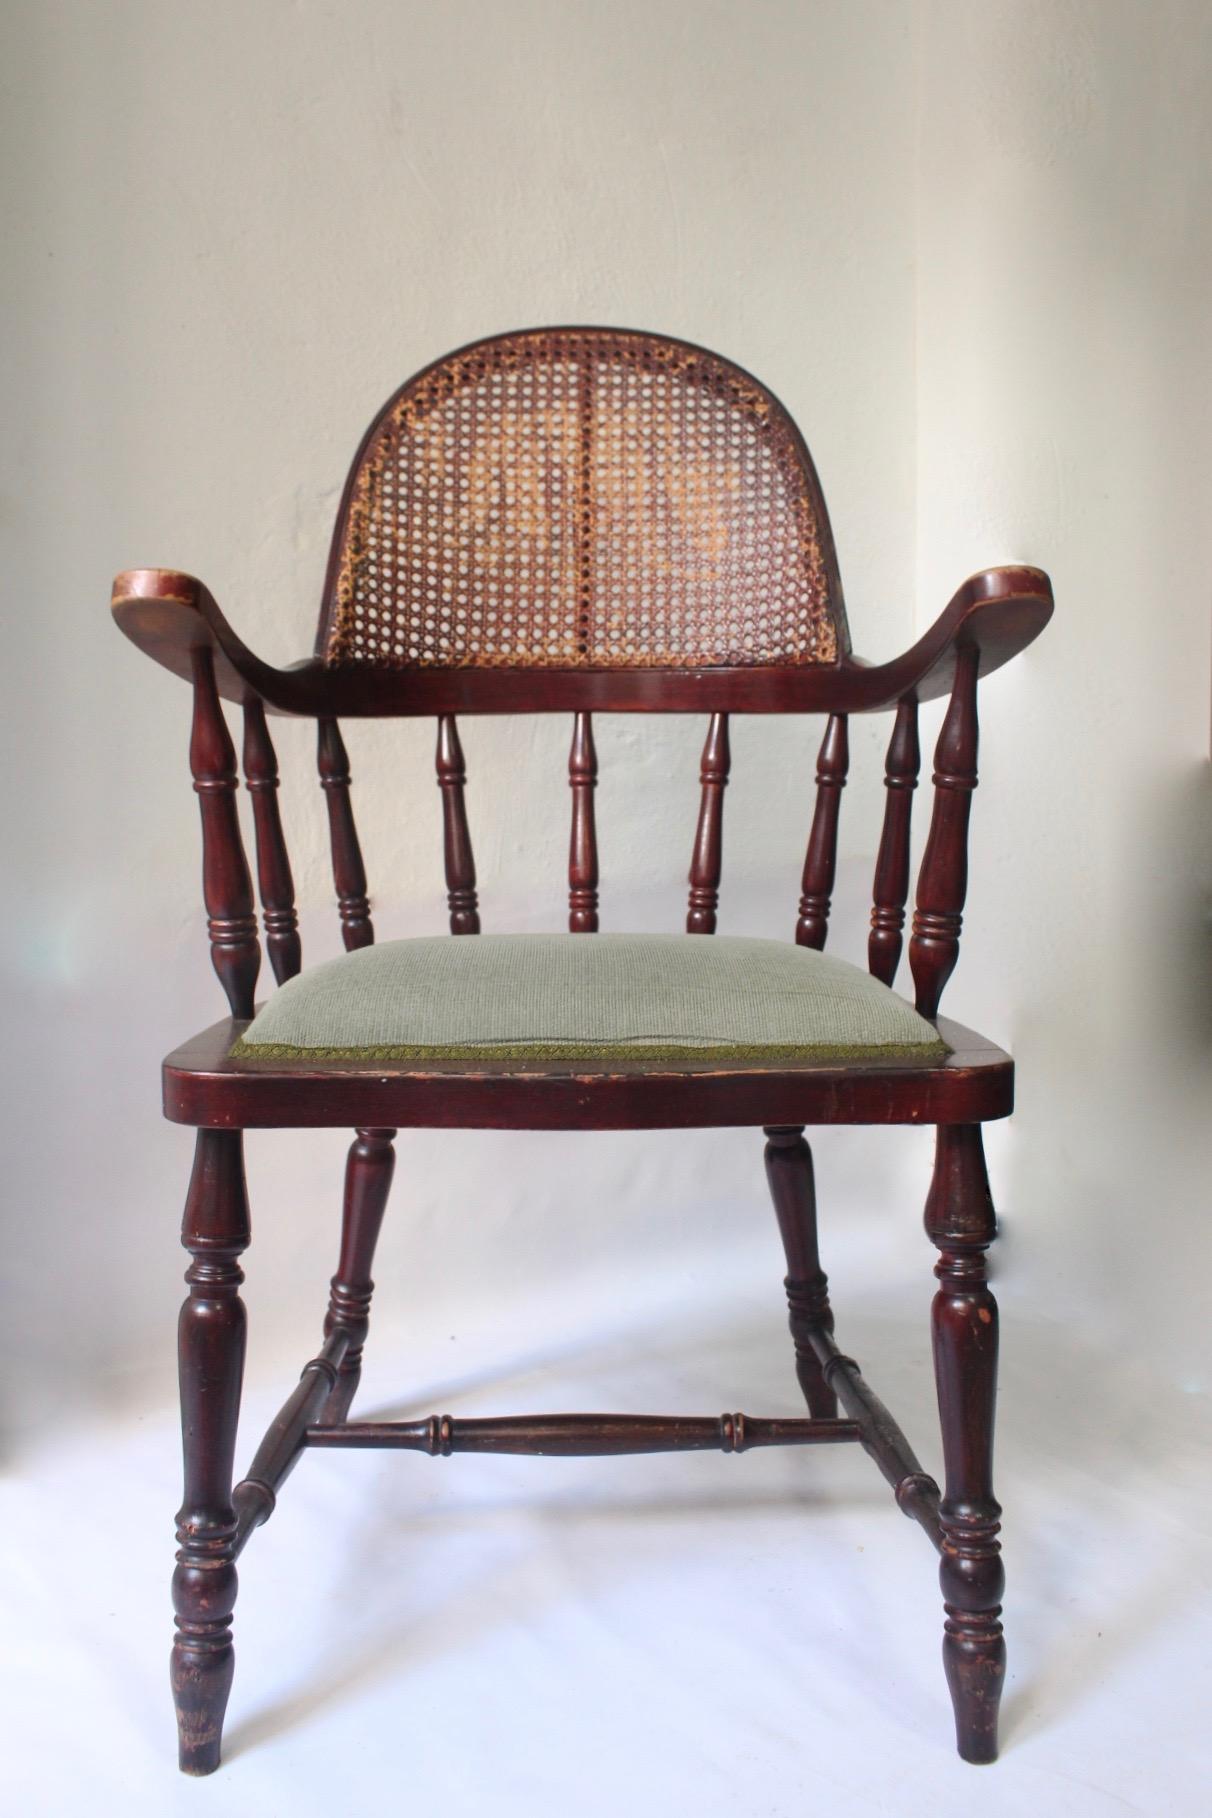 Antique uncommon English Windsor stick back caned chair, England, late 19th century.
Uncommon model of this Classic Country chair, with caned woven back and original upholstery.
 